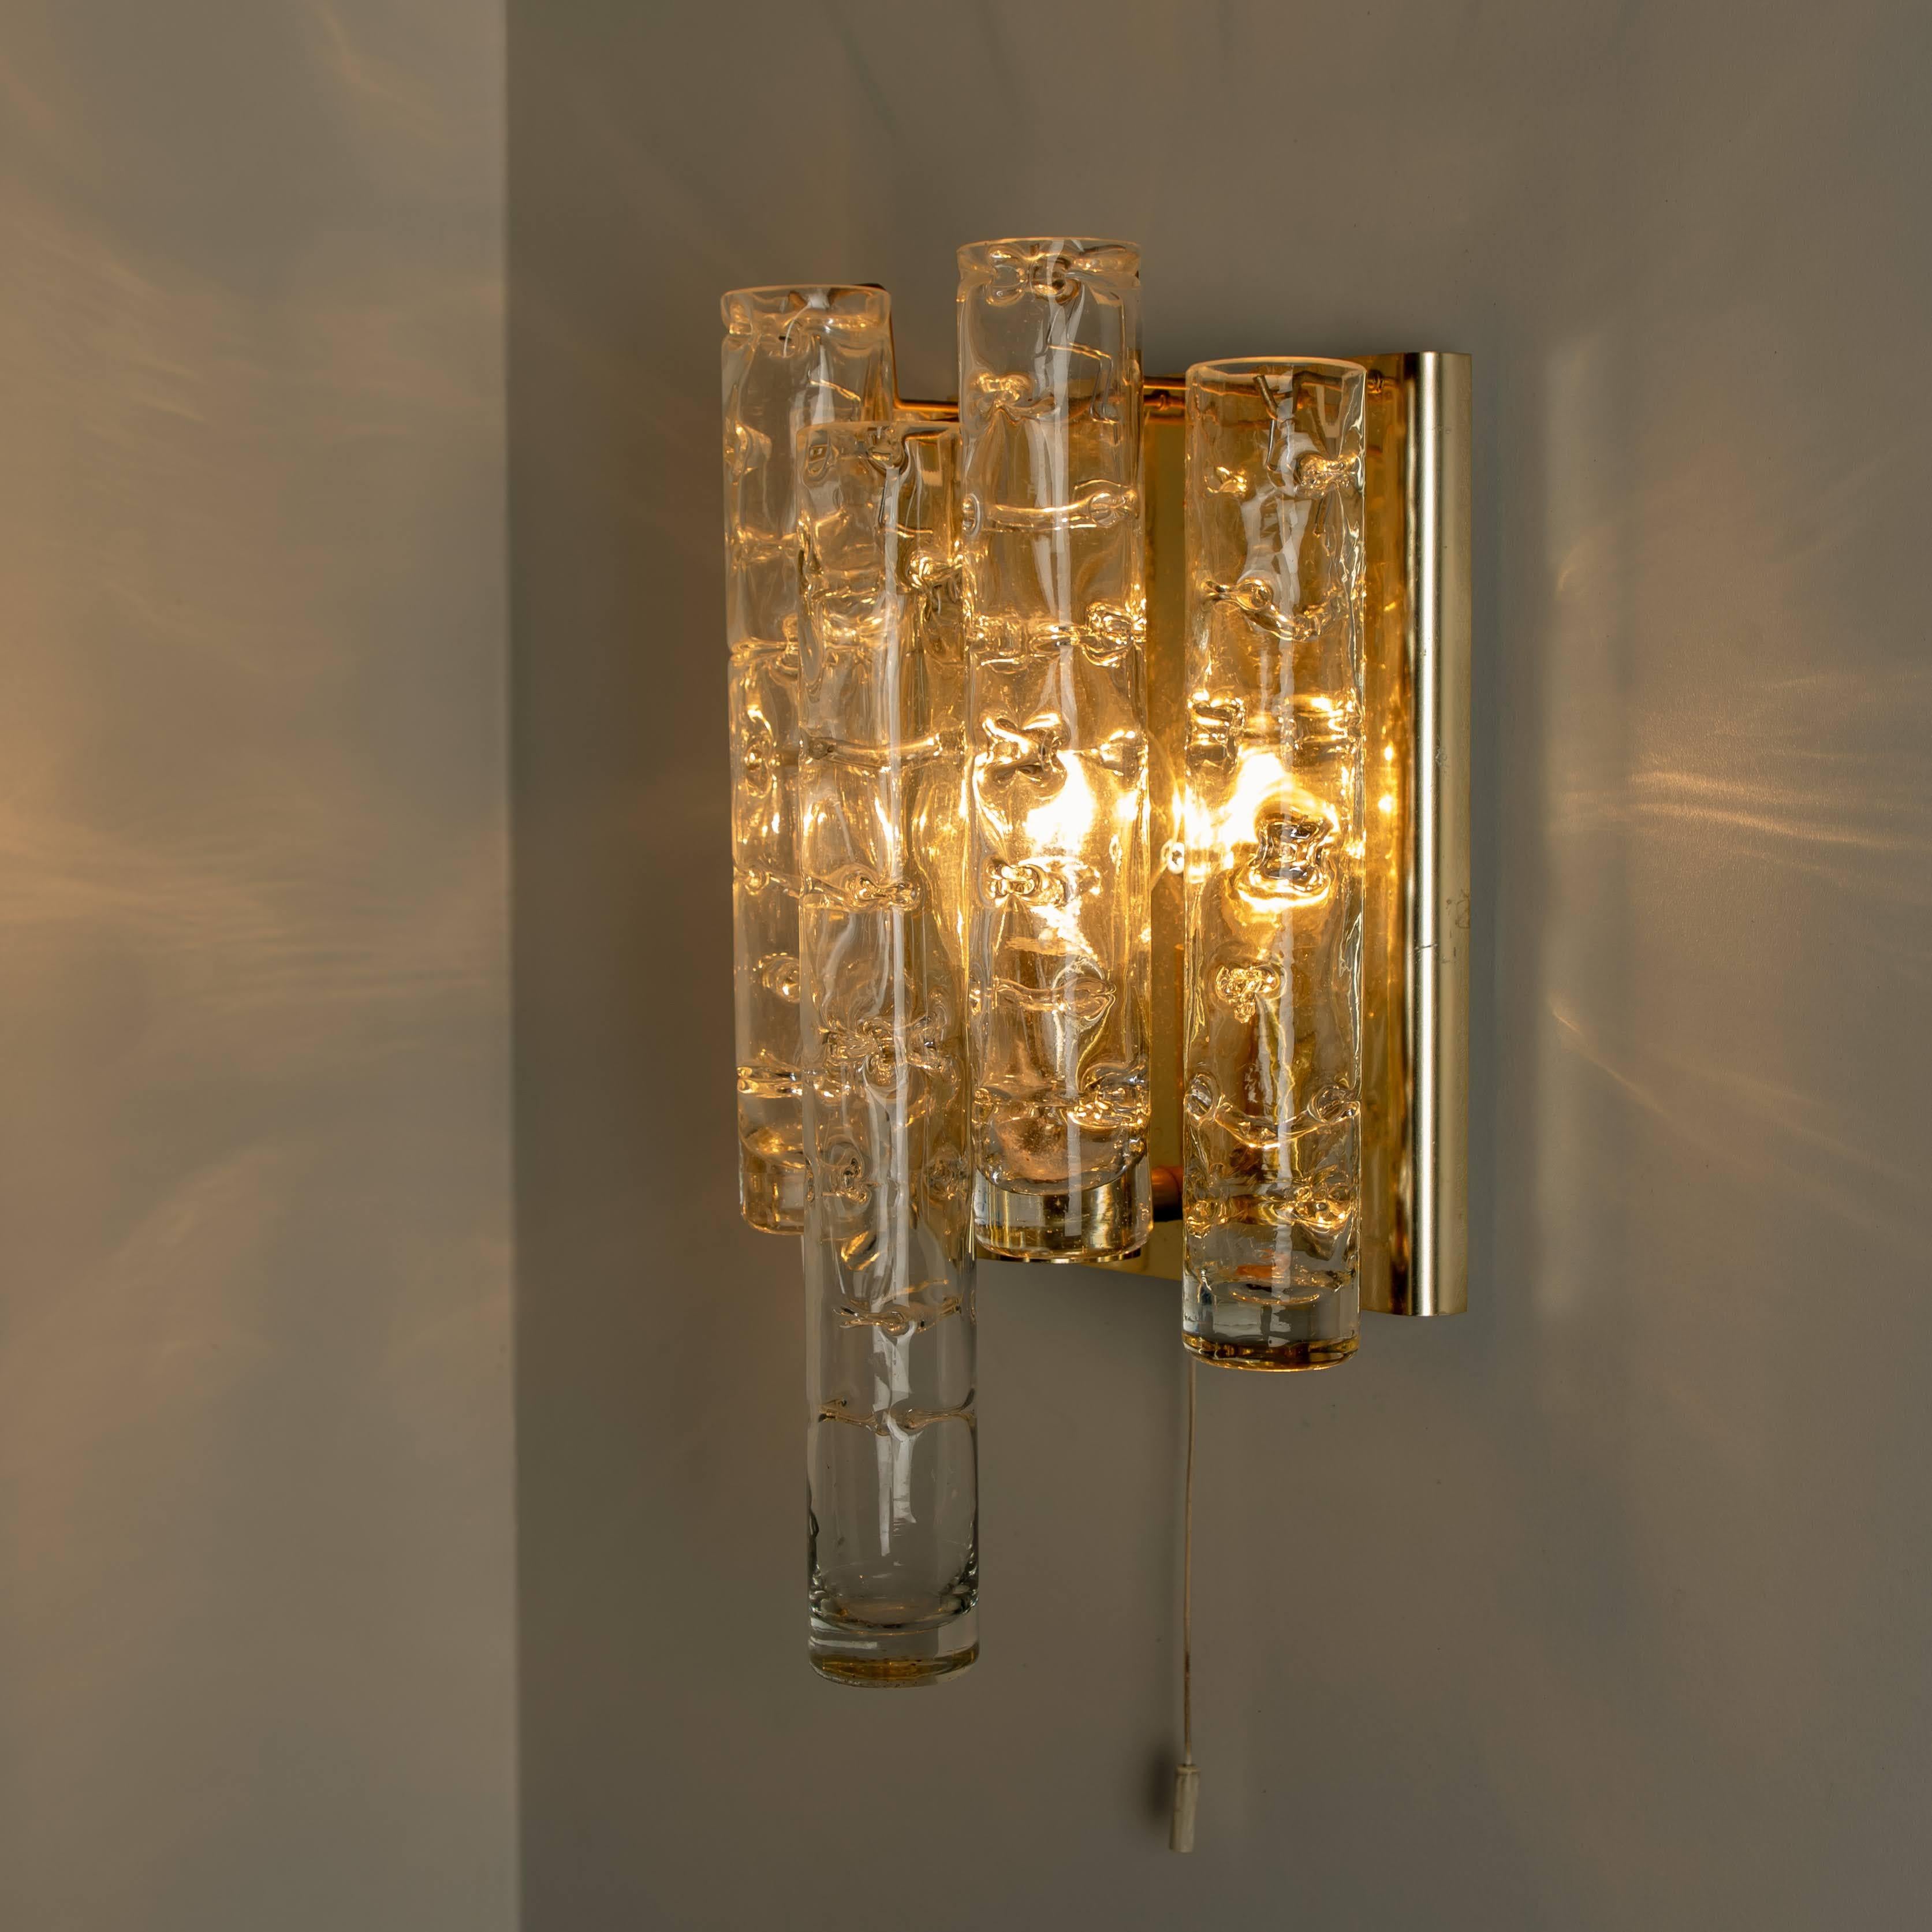 Pair of Doria Wall Lamps in Brass and Glass, 1960s For Sale 3